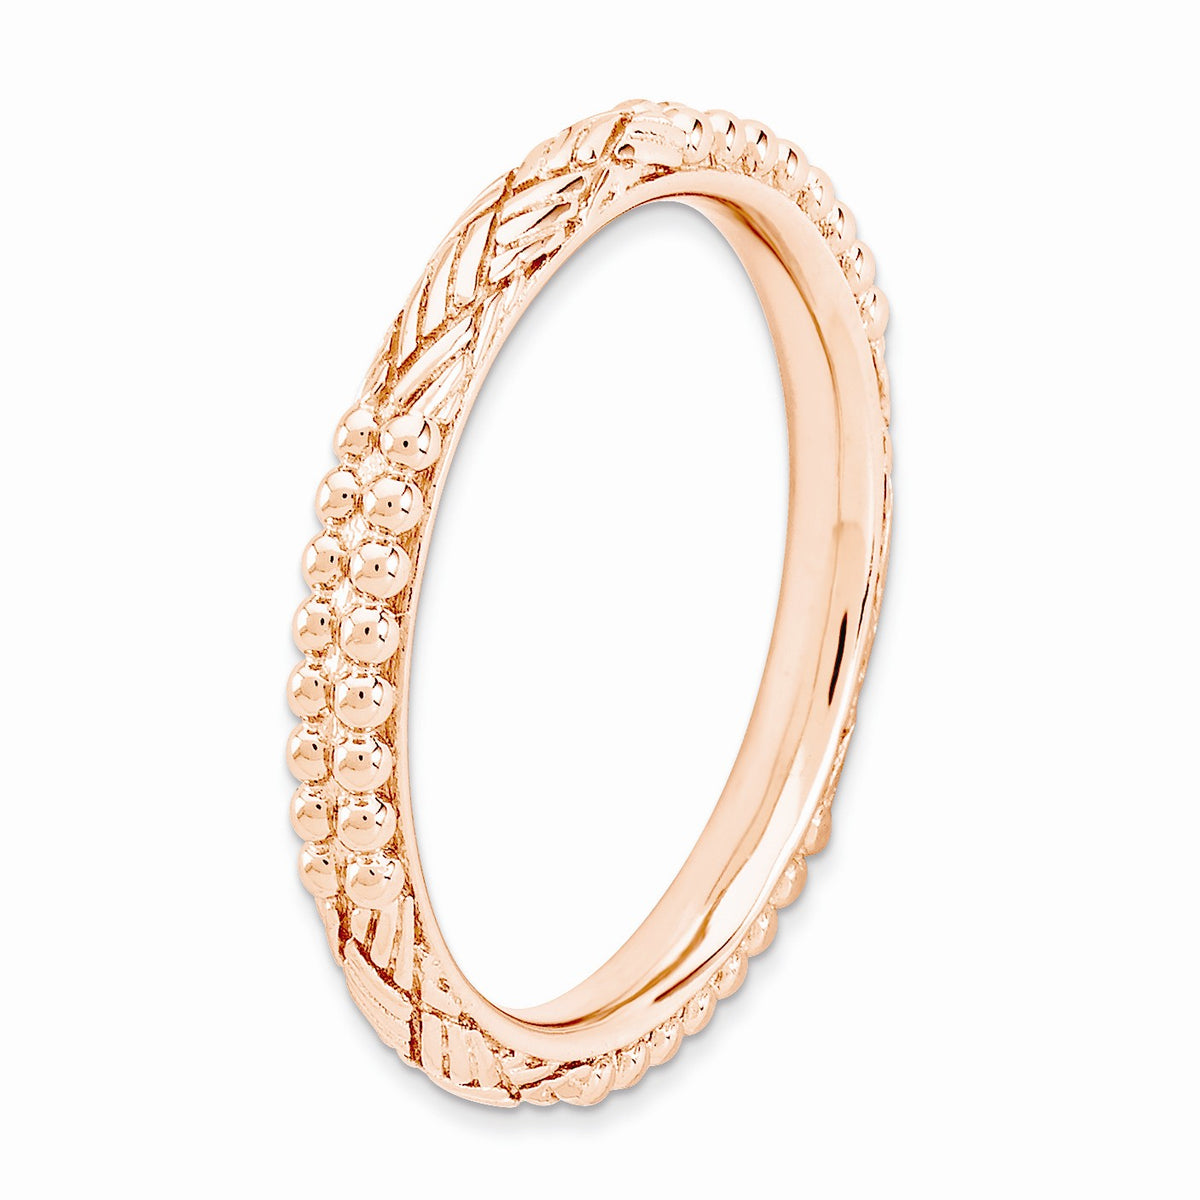 Alternate view of the 2.5mm Rose Gold Tone Plated Sterling Silver Stackable Patterned Band by The Black Bow Jewelry Co.